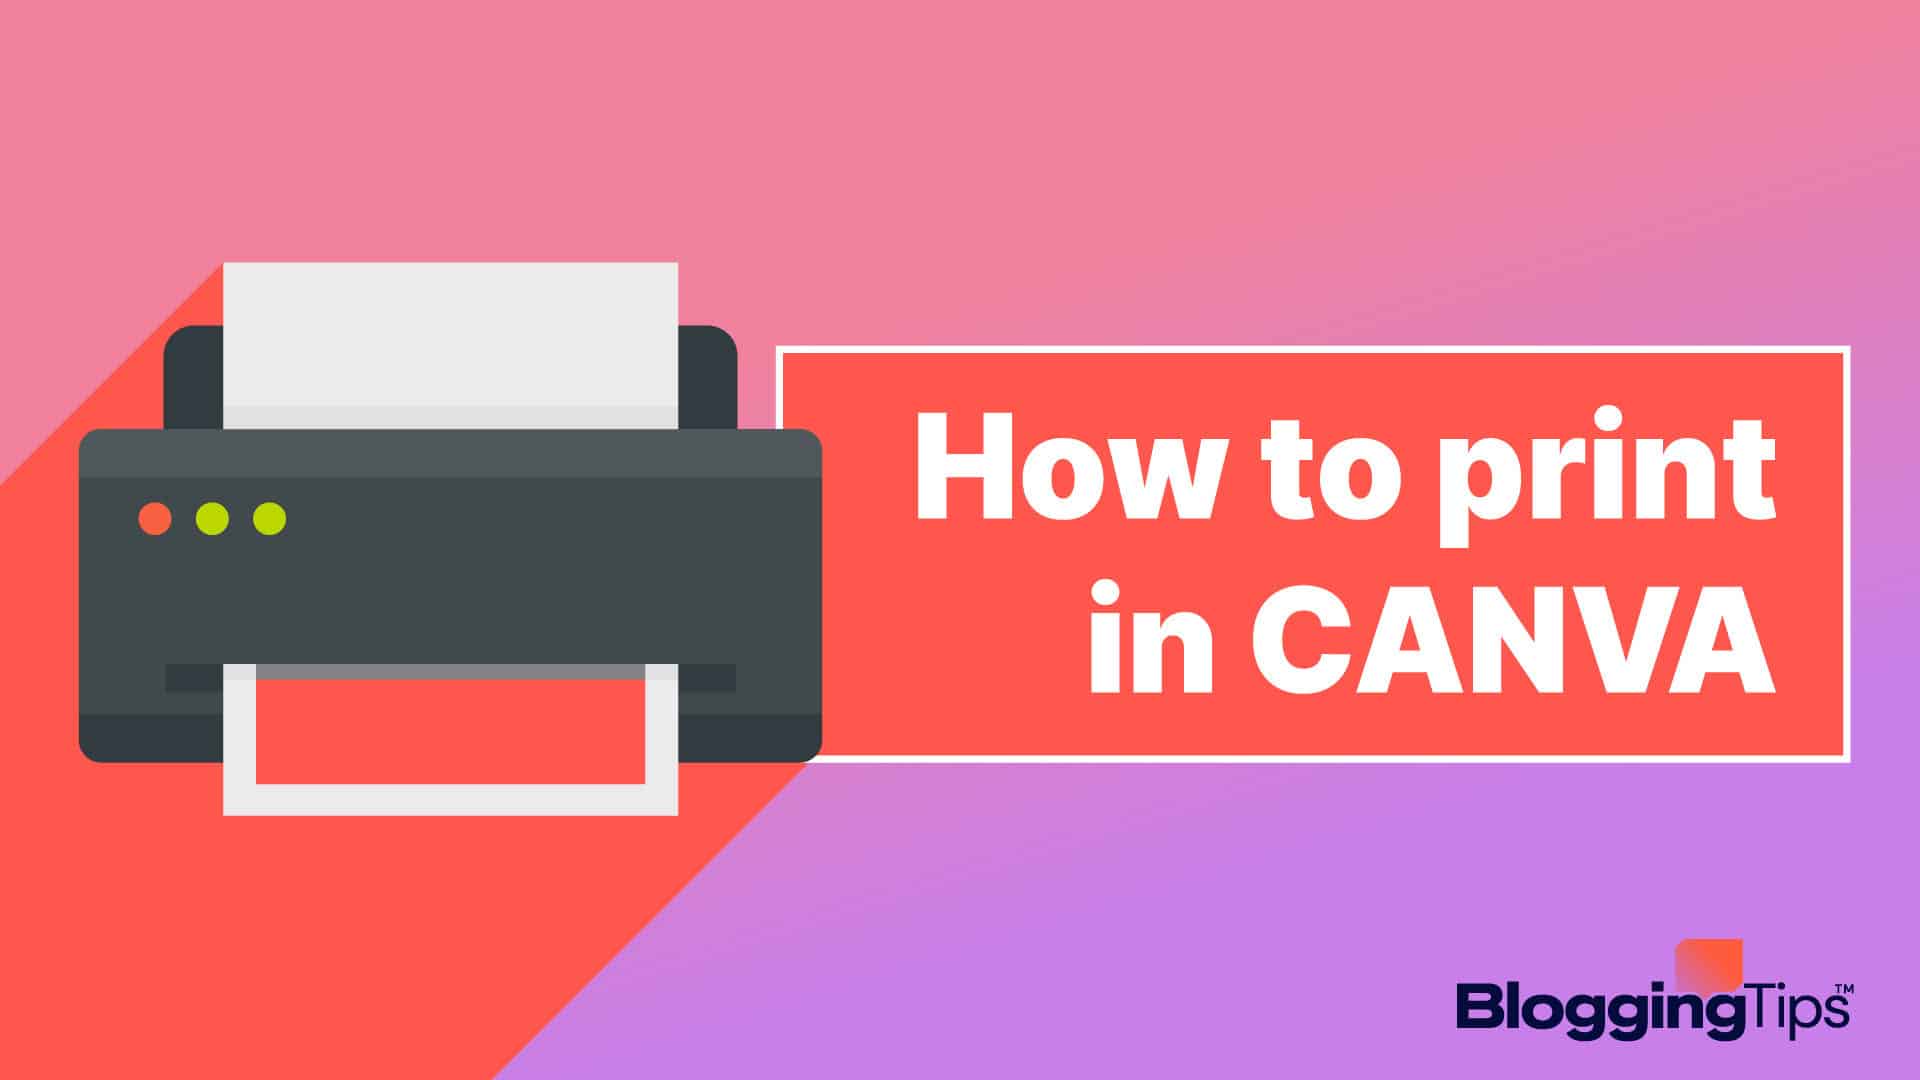 vector graphic showing an illustration of how to print in canva